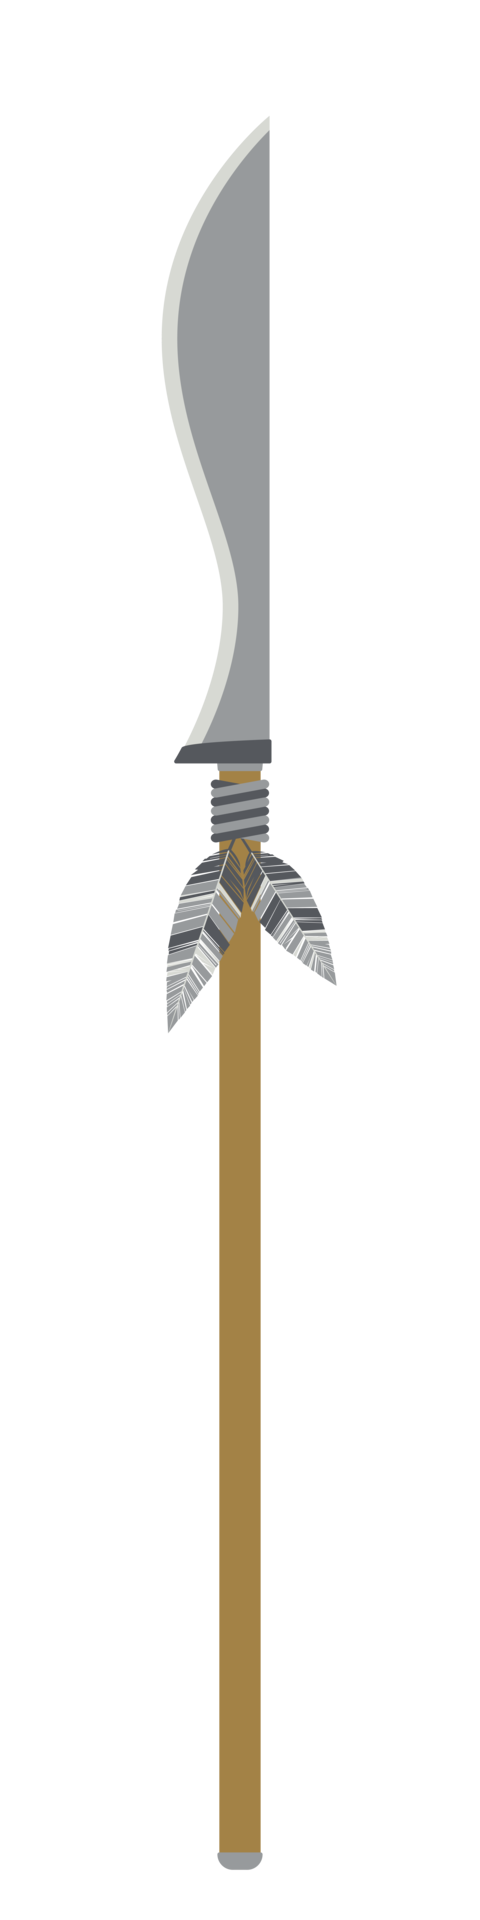 Free Spear War Lance Weapon Two Side Sharp Knight 15133087 PNG with ...